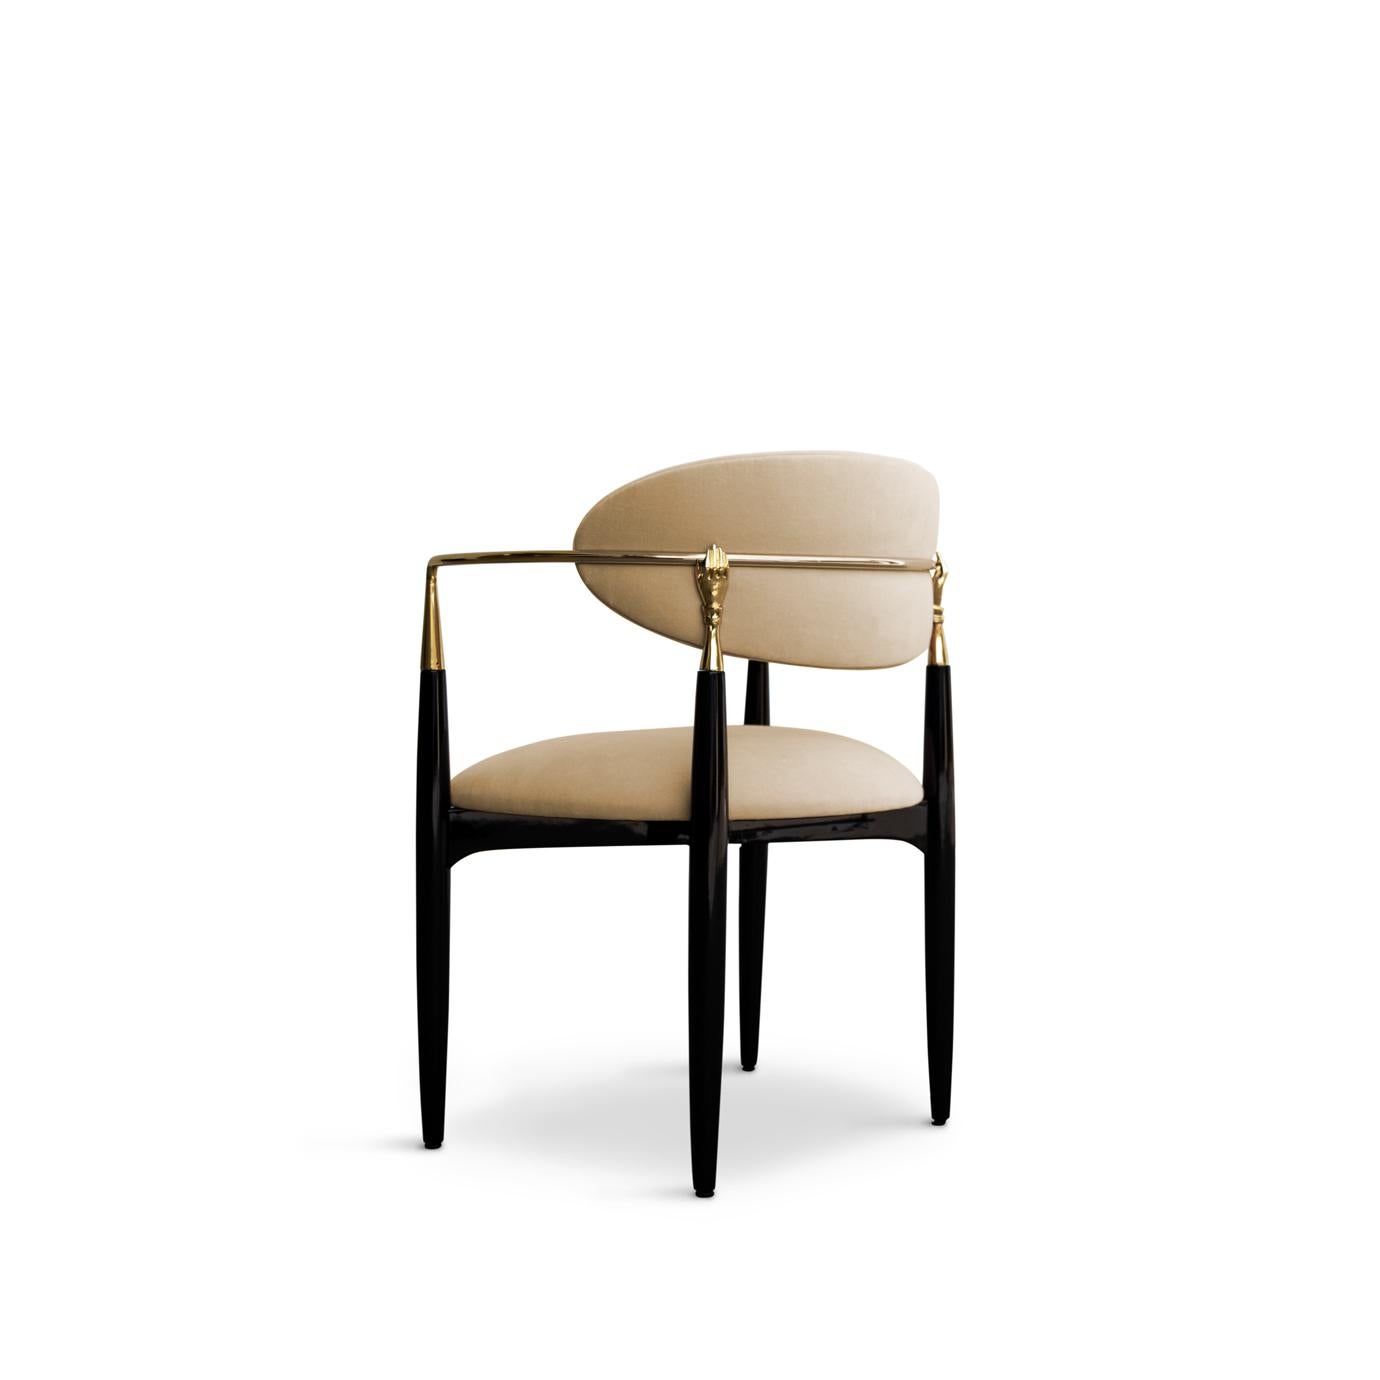 Try not to get handsy with the flirty and modern design of the Nahéma chair. Her sweet seat and contemporary detached back are bound by a metal and lacquer frame complete with two hand details, insistently grasping at your desire.